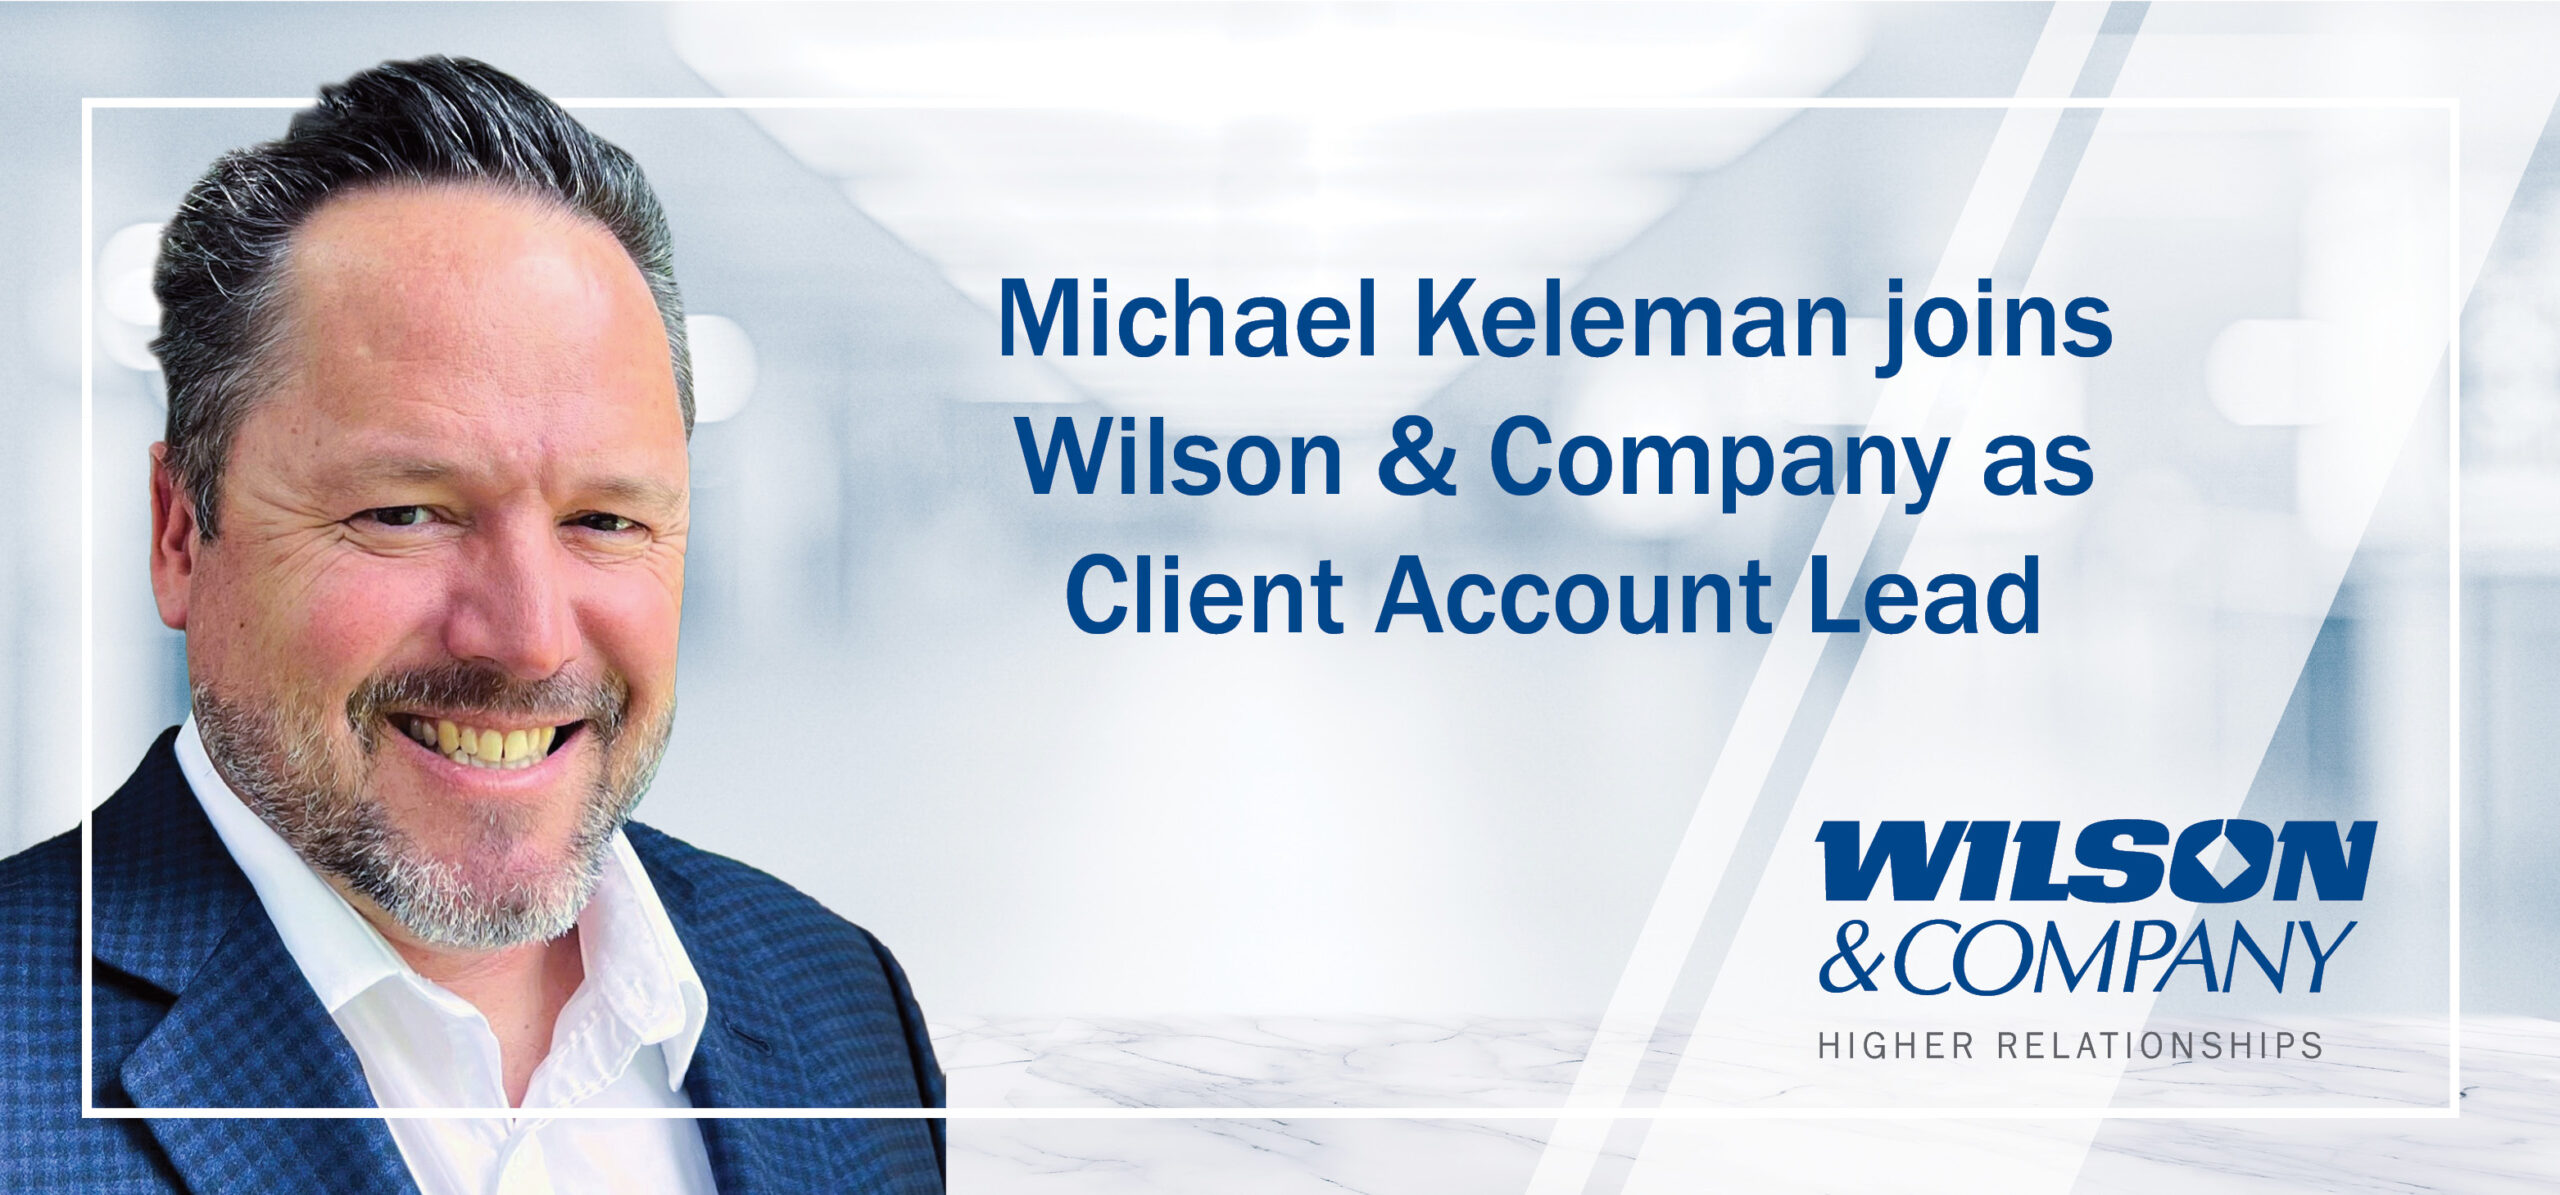 Michael Keleman joins Wilson & Company as client account lead